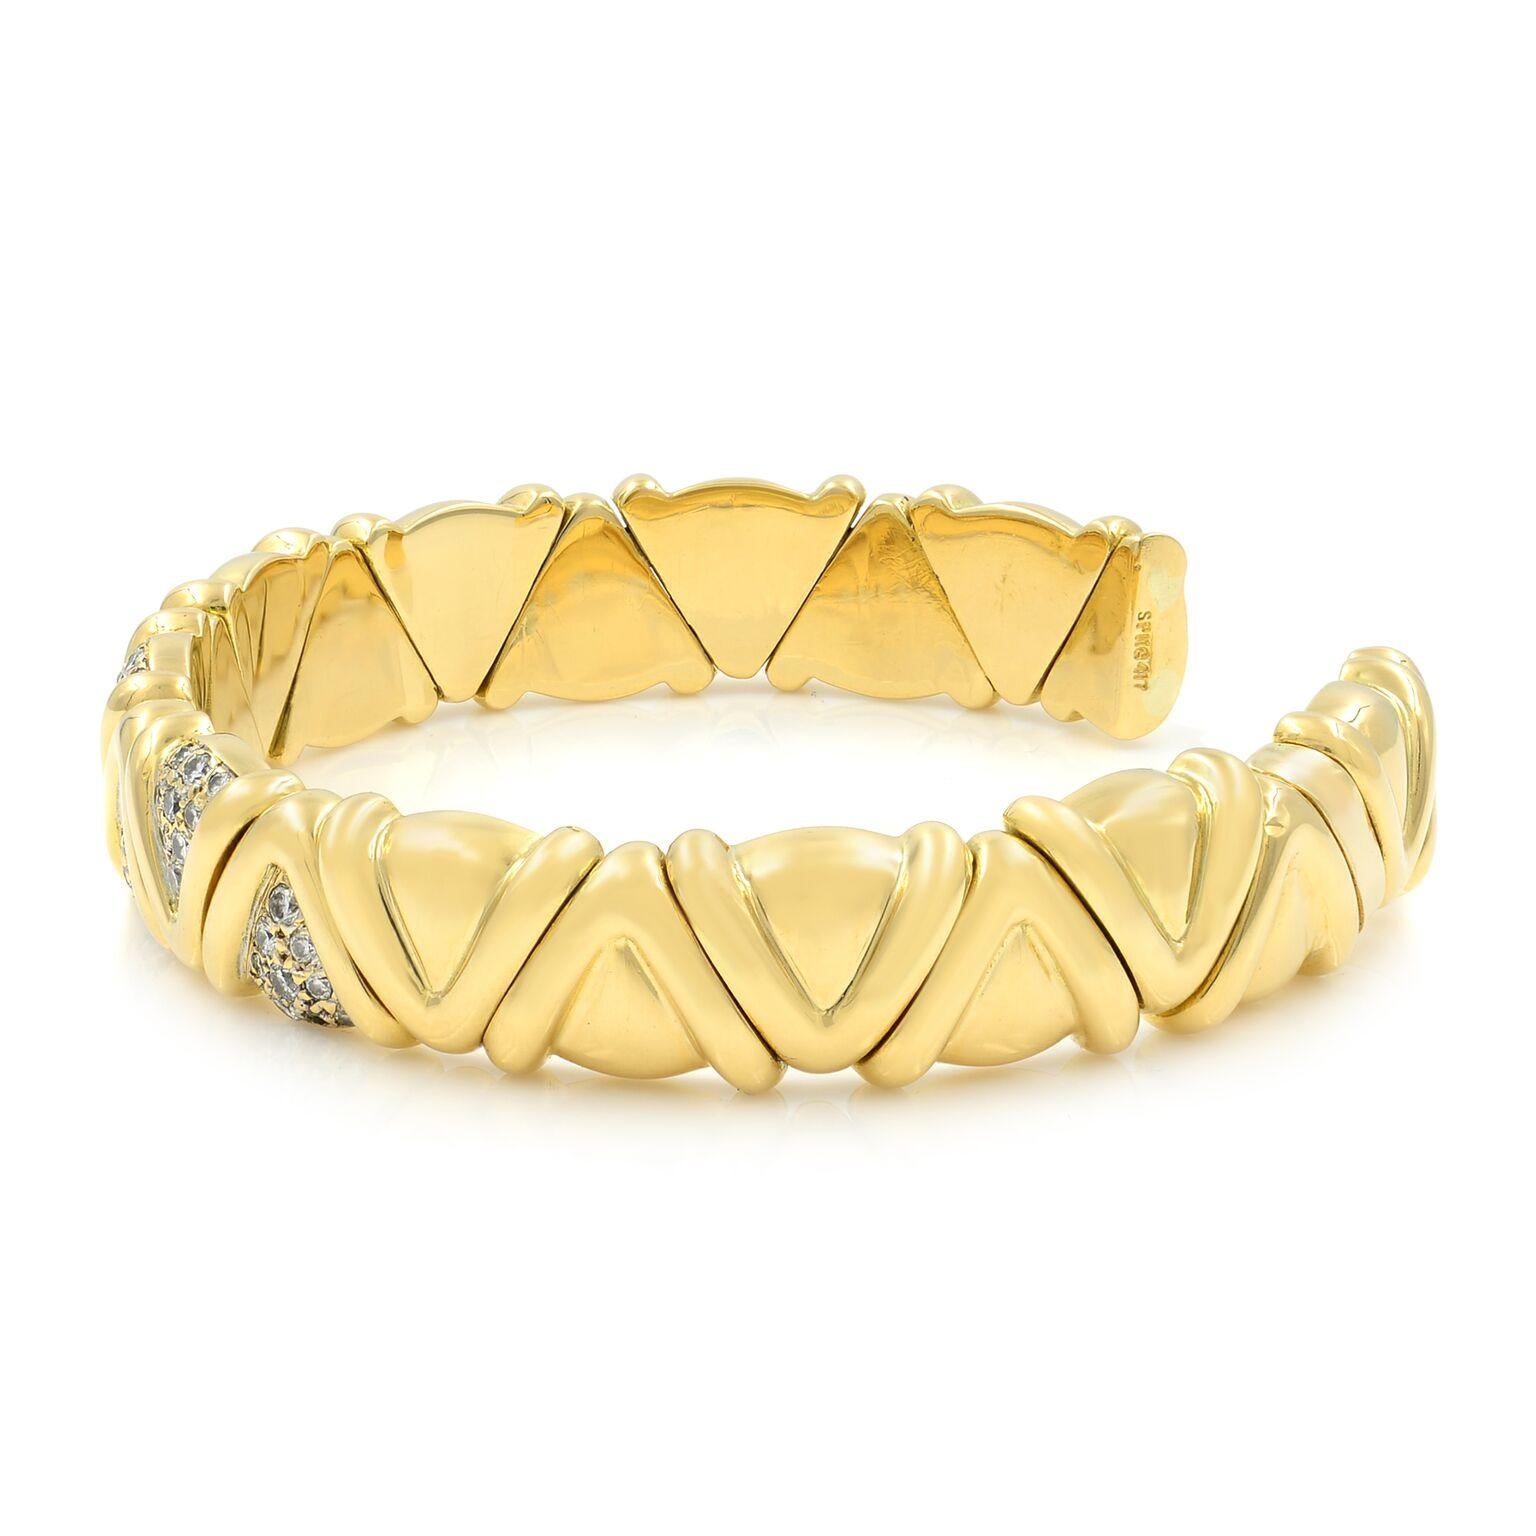 A fashionable Estate cuff bracelet crafted in solid 18k yellow gold. This bracelet features a geometric fitted design at the front of the band with micro pave set round brilliant cut diamonds. The total diamond weight is 1.00cts. Bracelet width: